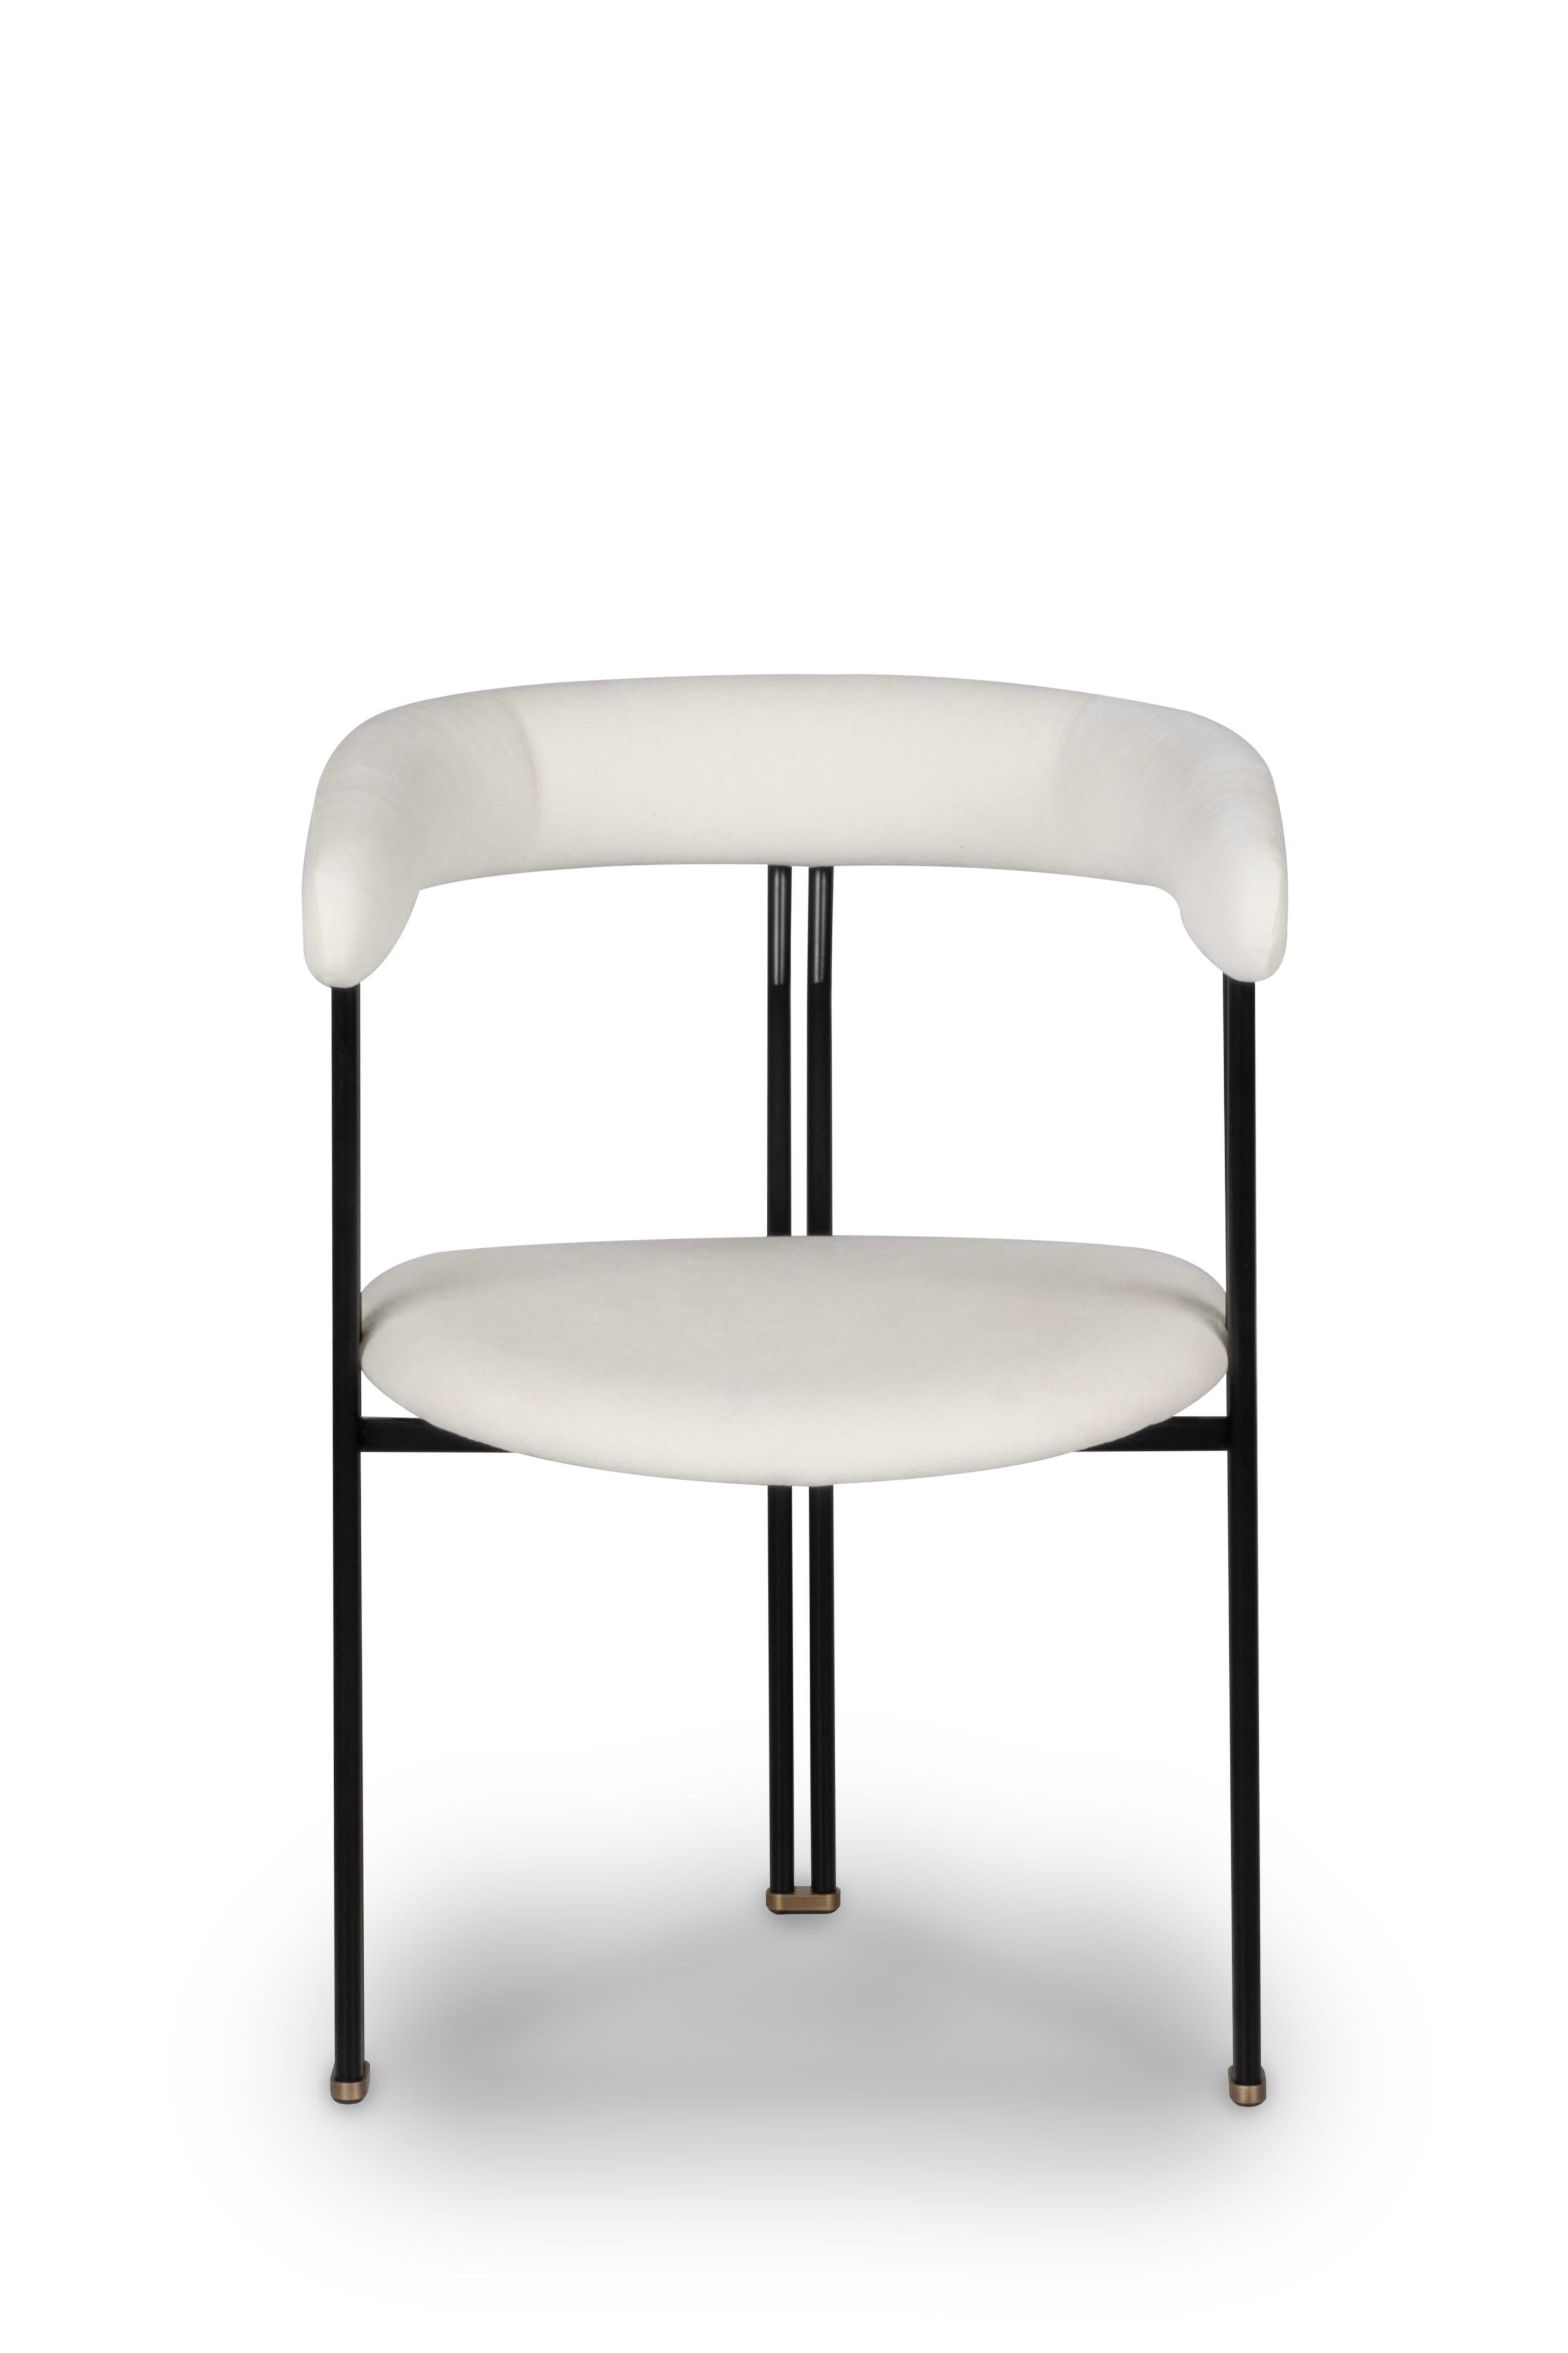 Contemporary Modern Maia Dining Chairs, White HOLLY HUNT, Handmade in Portugal by Greenapple For Sale